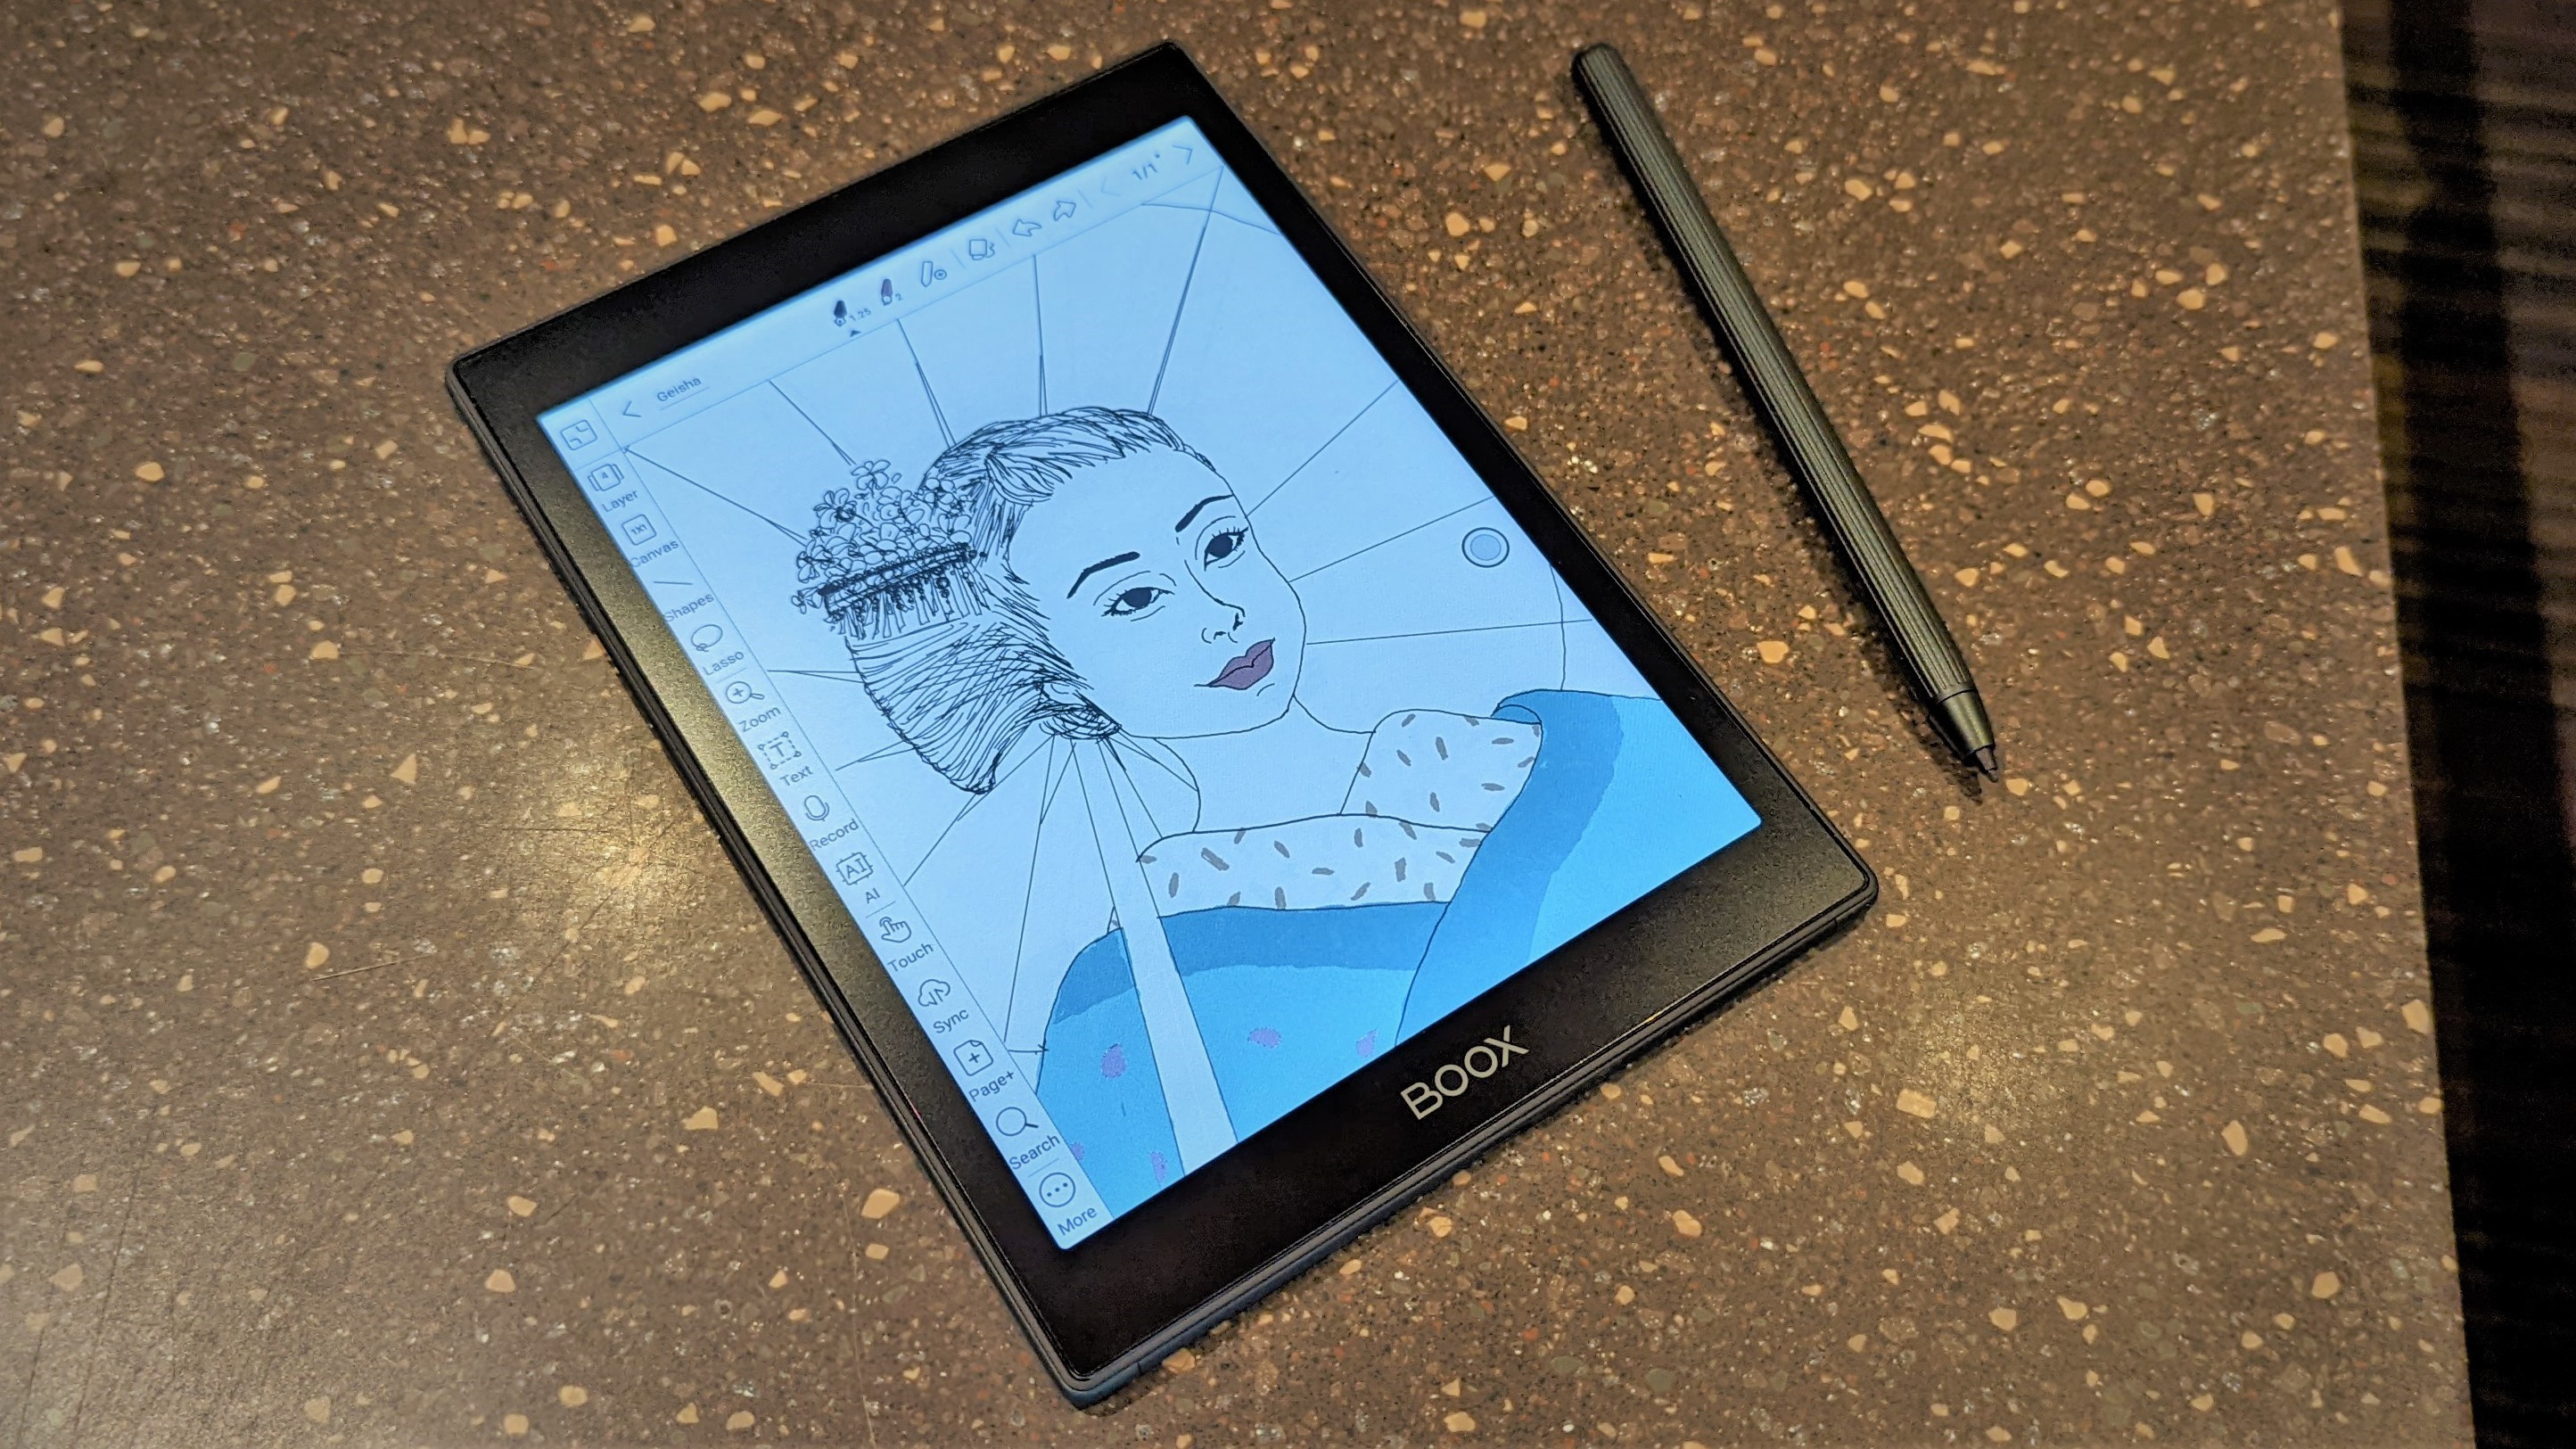 ONYX BOOX NovaAir タブレット  Android